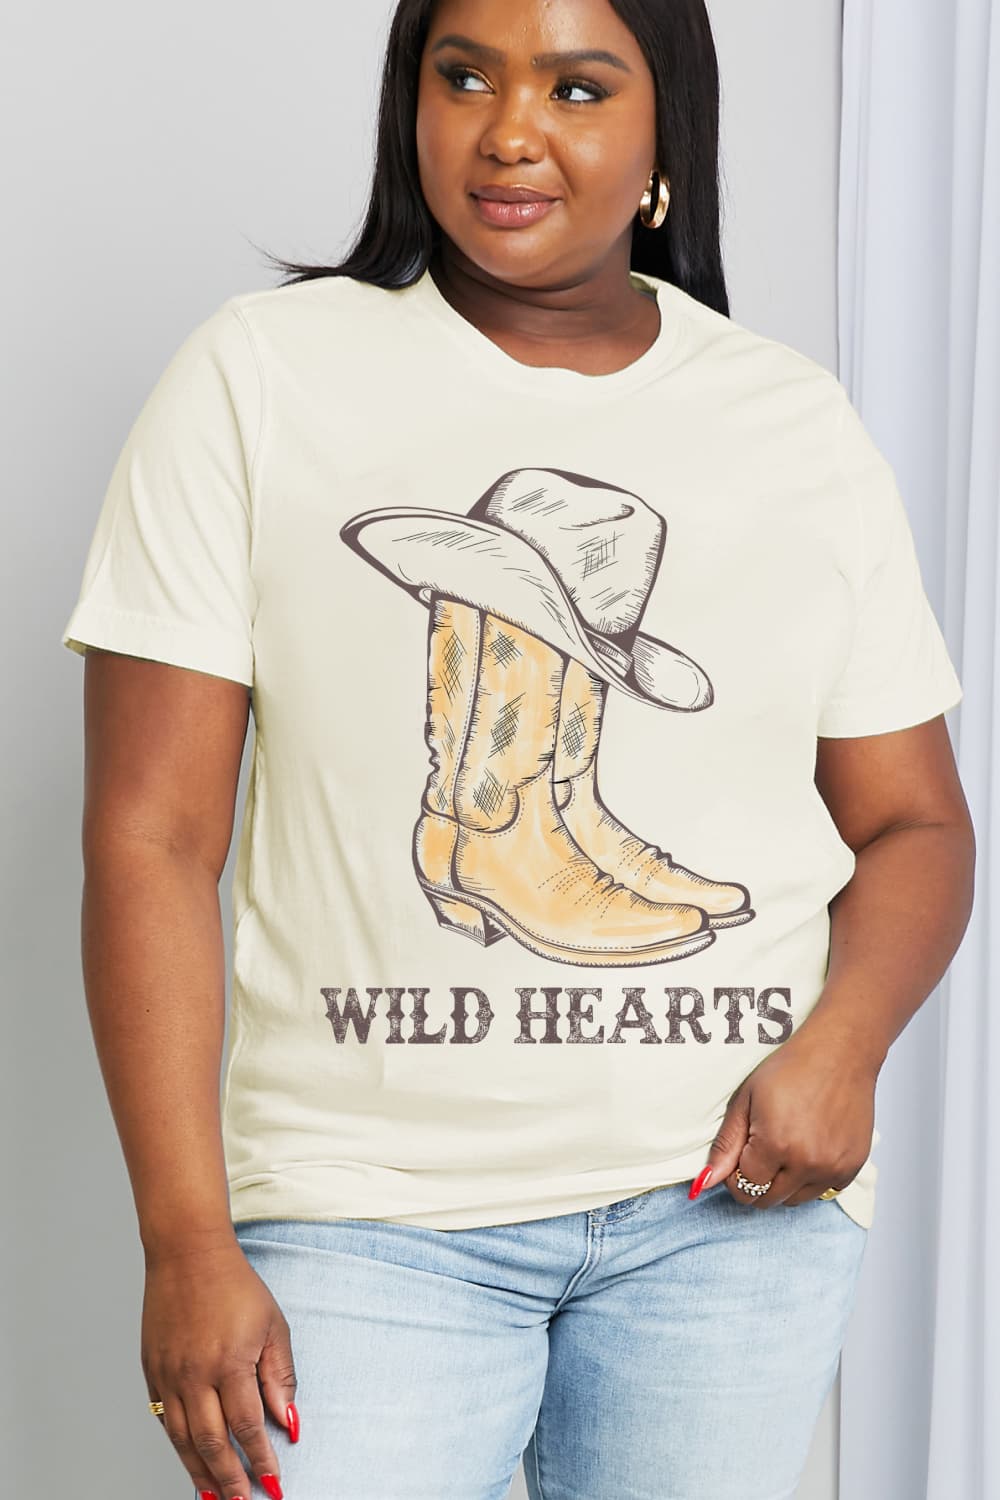 Full Size WILD HEARTS Graphic Cotton Tee